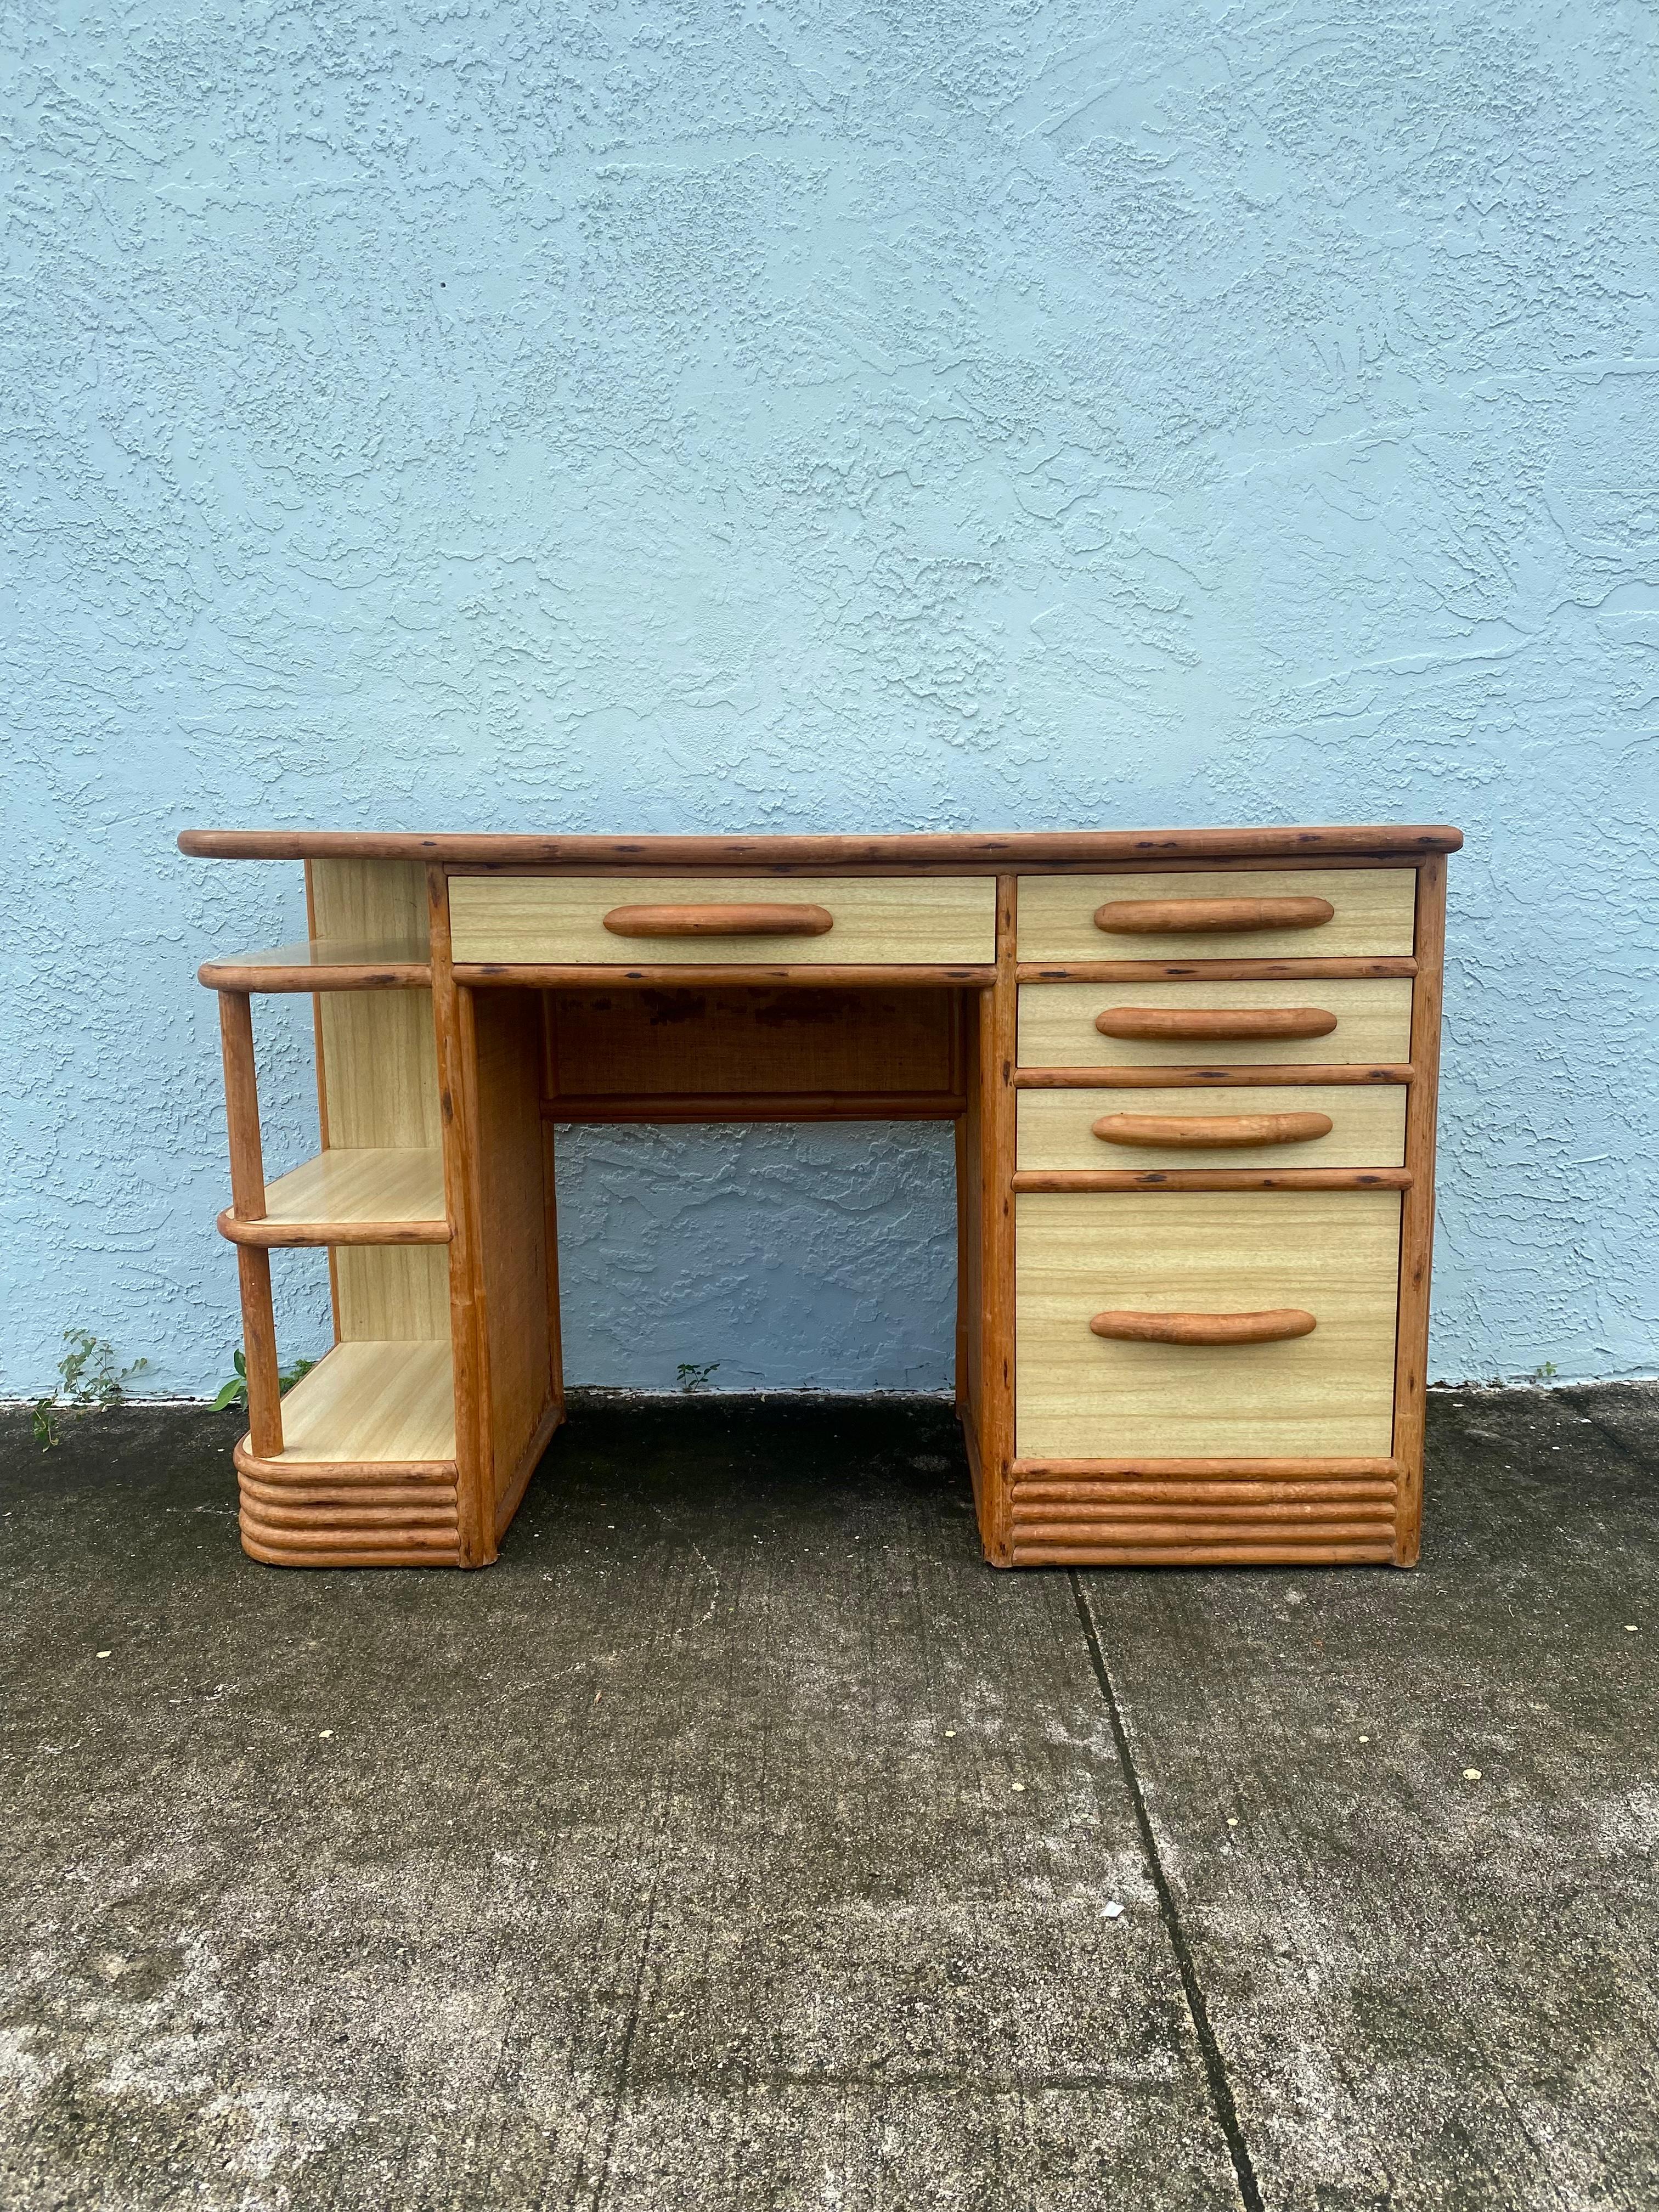 On offer on this occasion is one of the most stunning desk you could hope to find. This is an ultra-rare opportunity to acquire what is, unequivocally, the best of the best, it being a most spectacular and beautifully presented rattan desk.